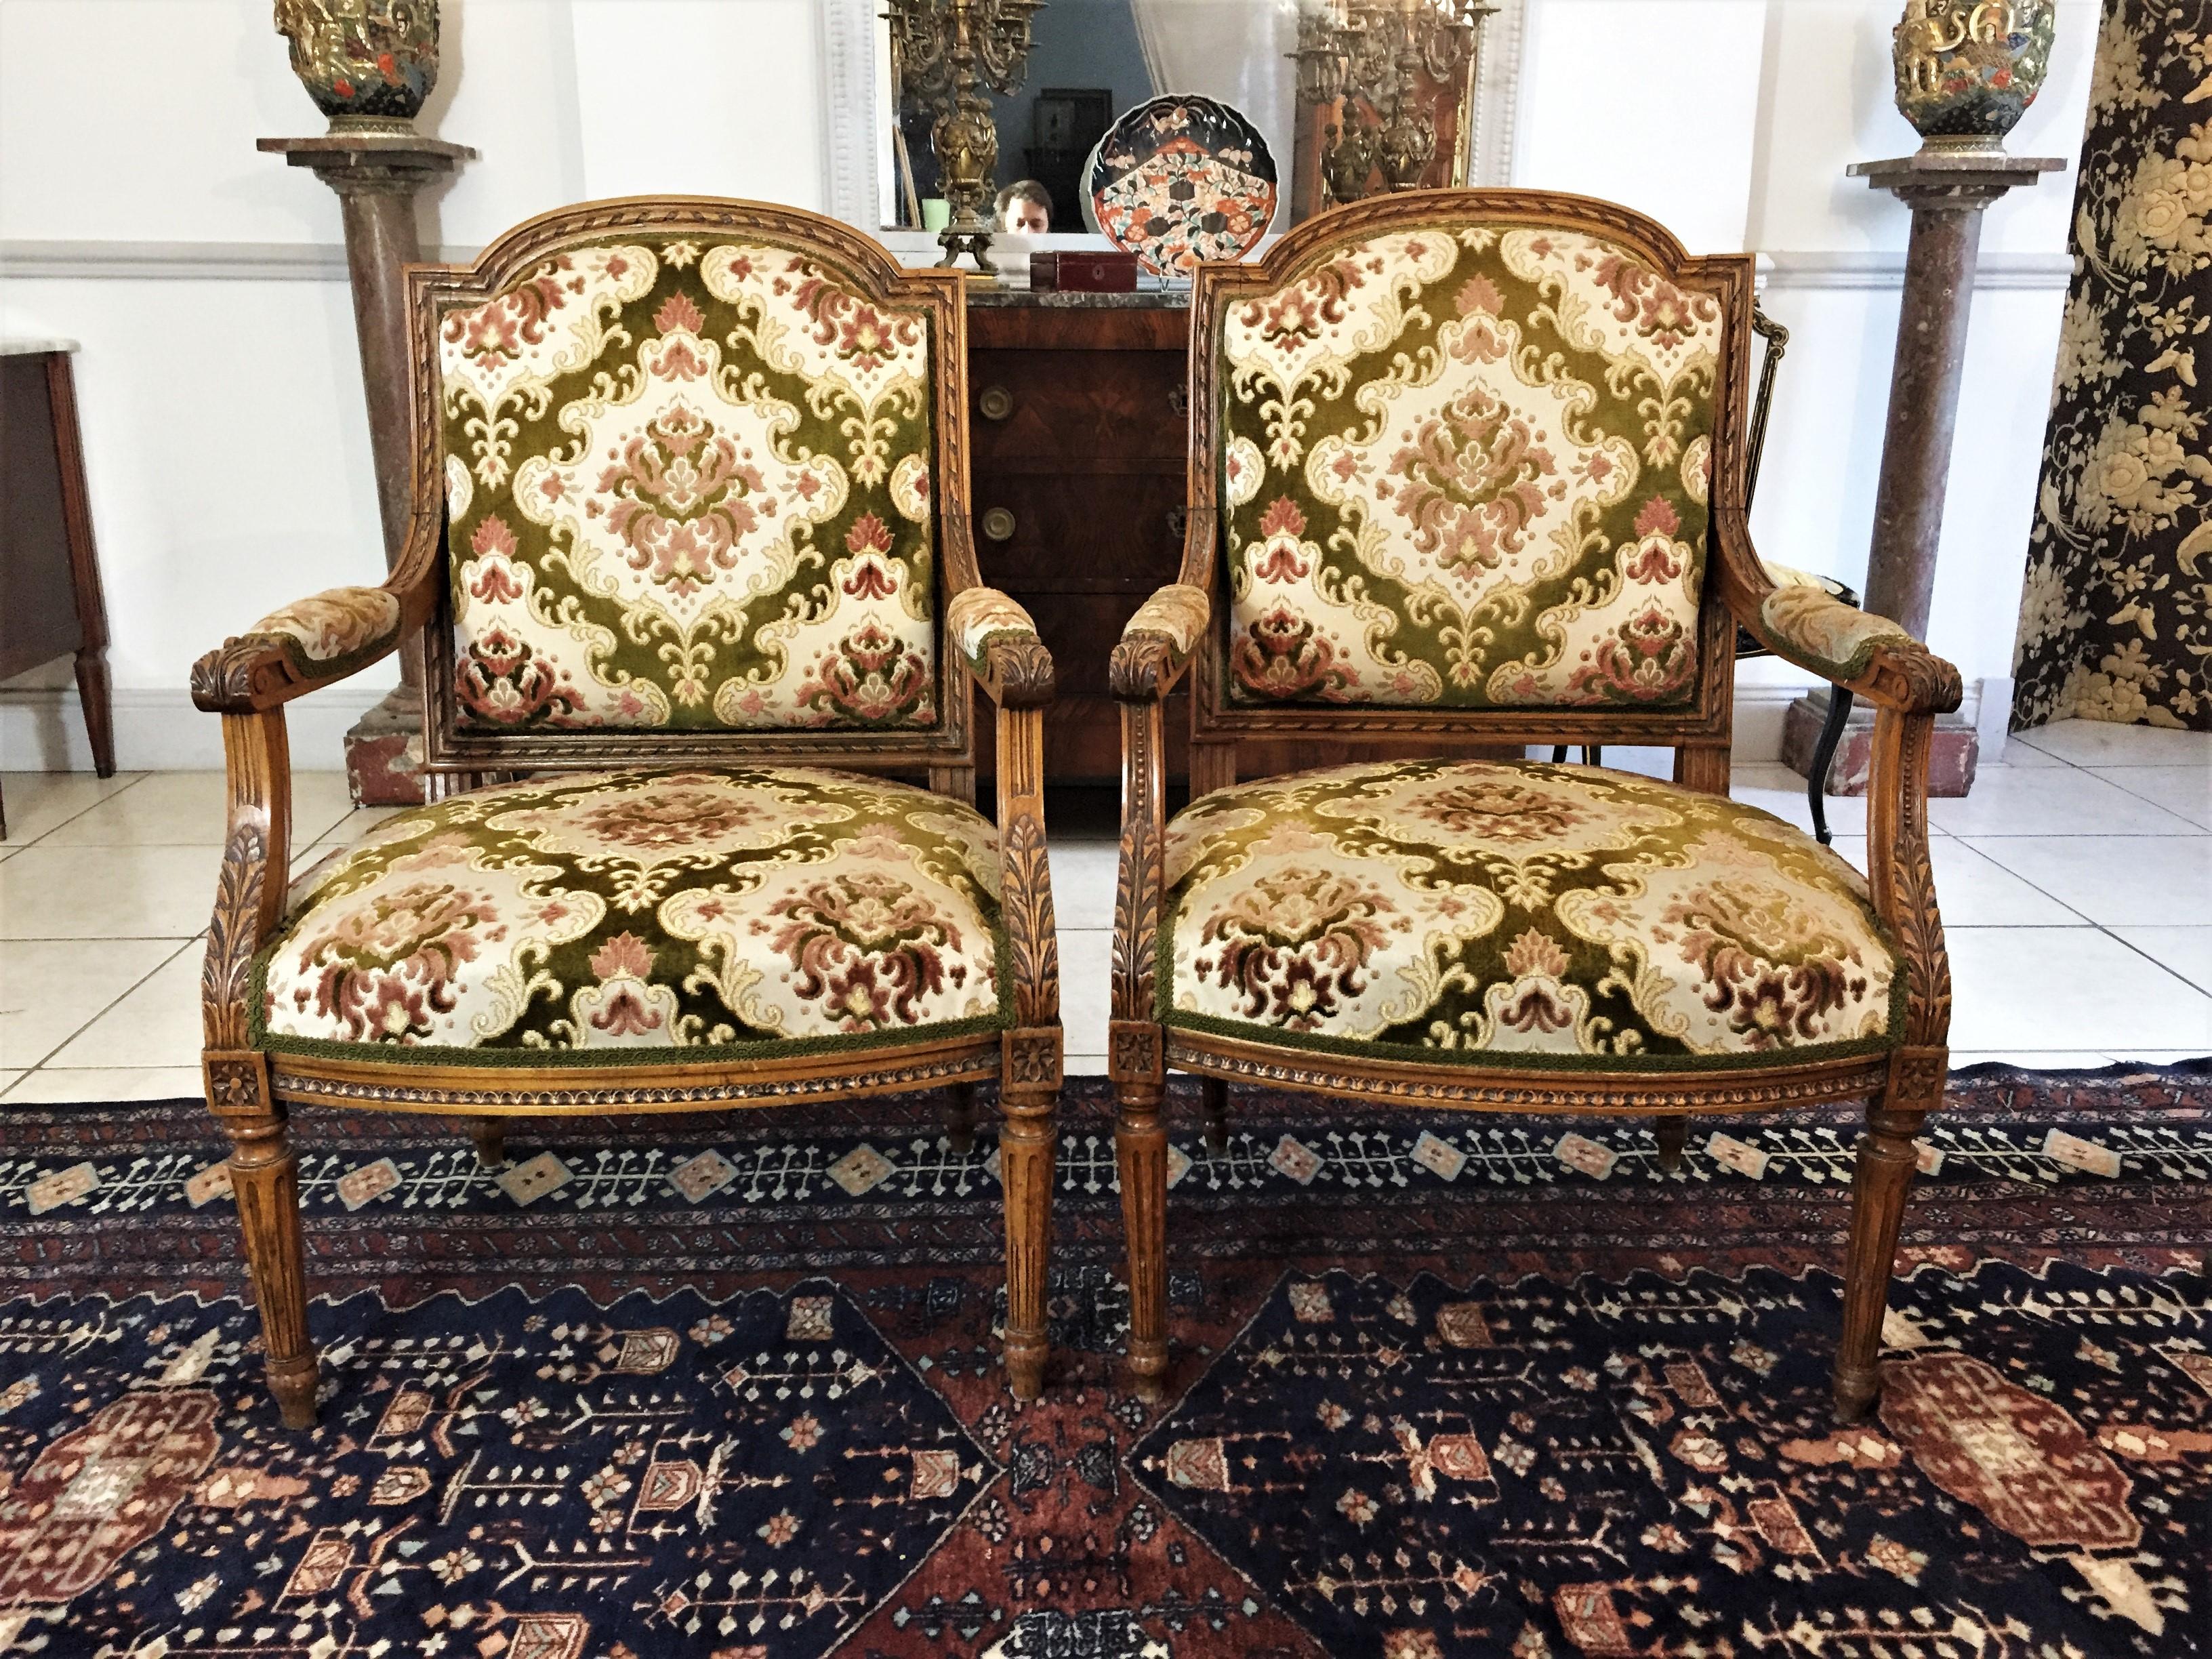 Beautiful pair of Louis XVI style armchair, fluted and rudenté base, frieze belt, carved backrest with basket handle, pearls and ribbons, the armrests decorated with acanthus leaves, ending in winding. The pair is furnished with its original fabrics